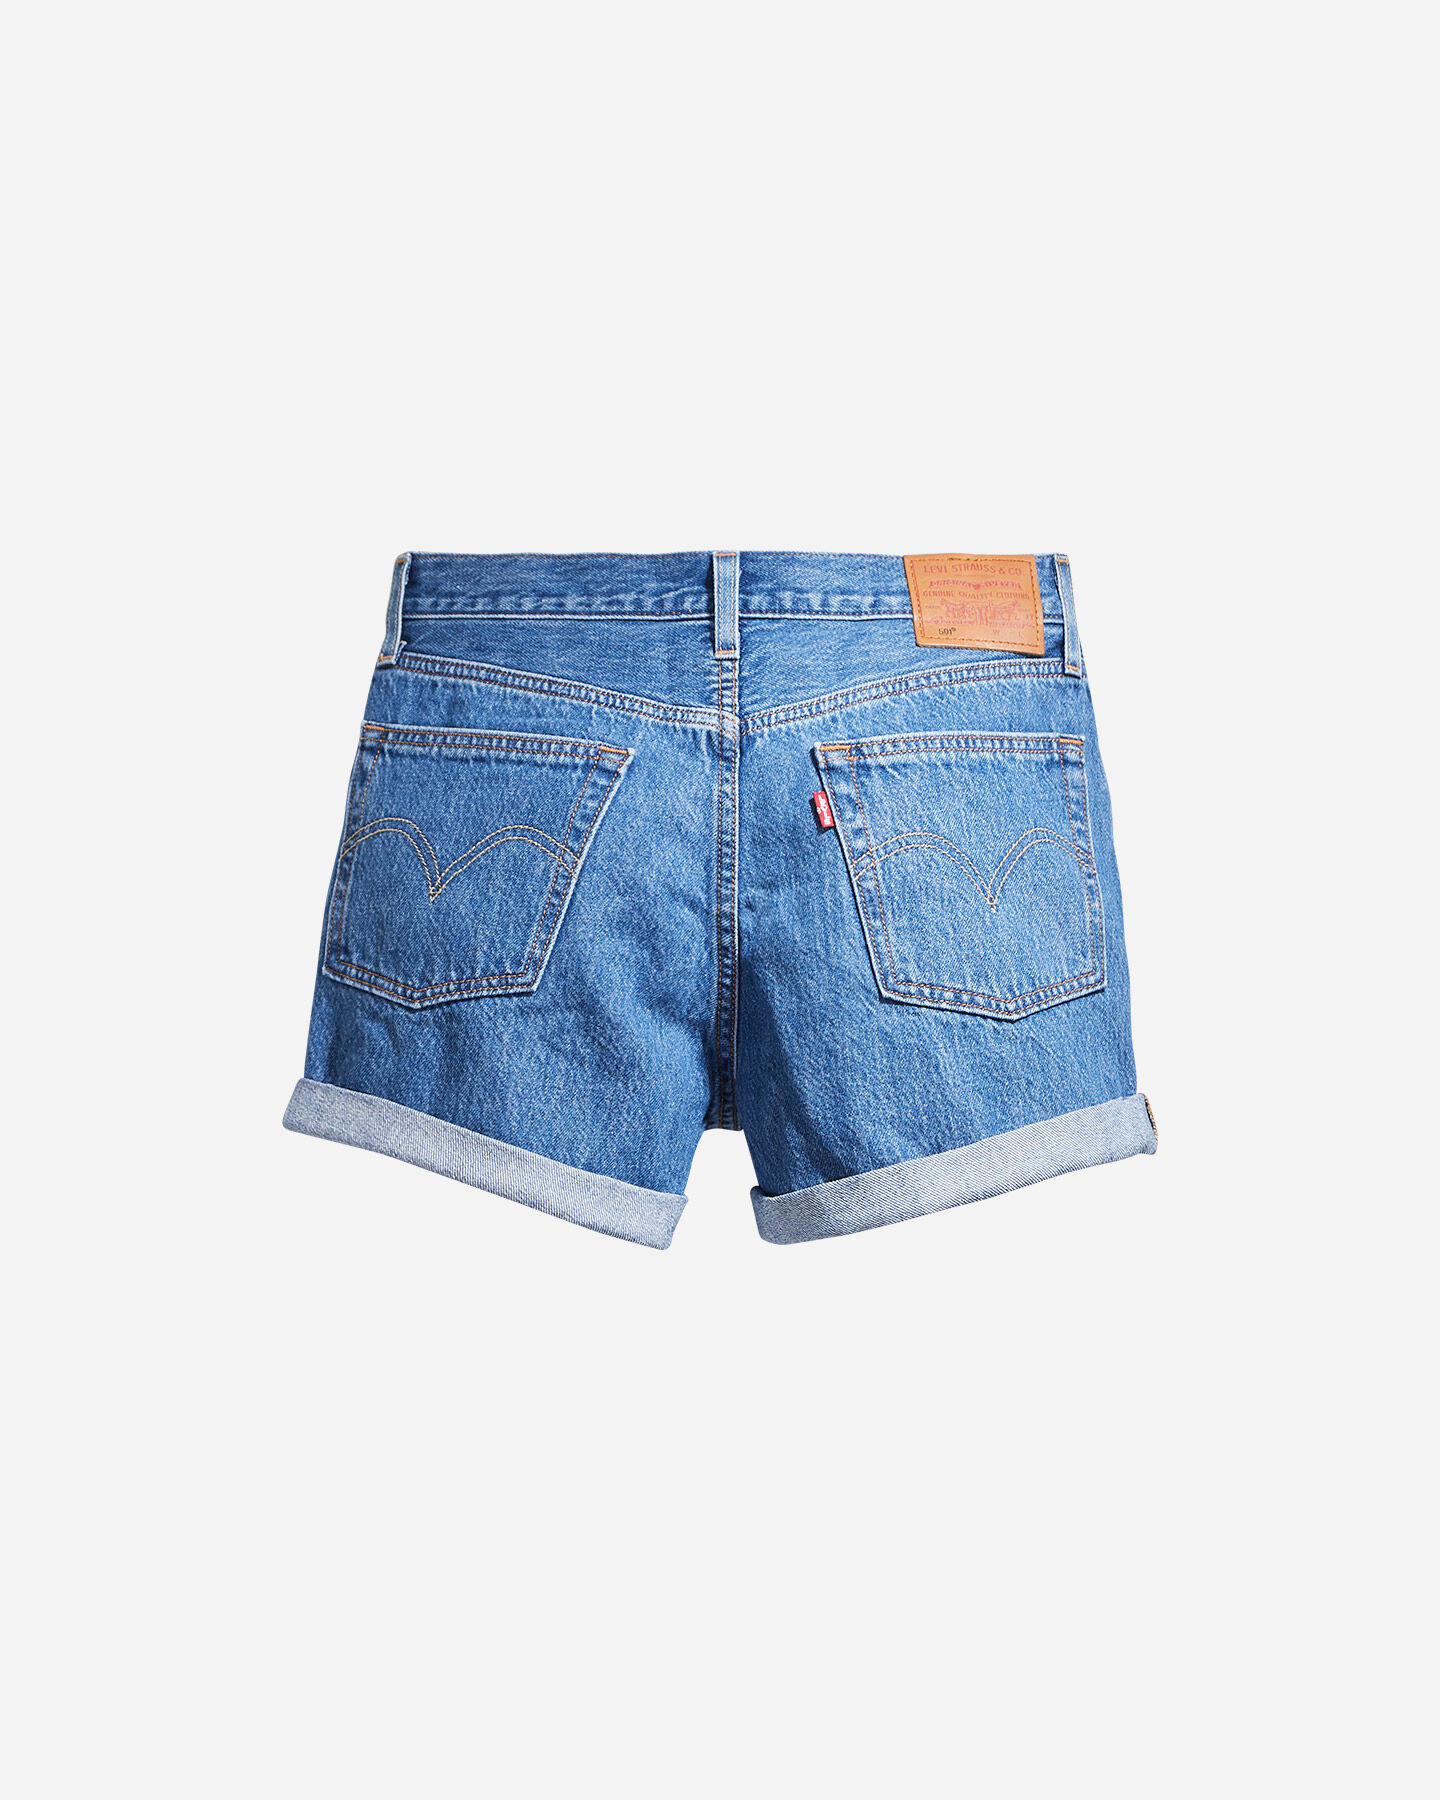  Jeans LEVI'S 501 ROLLED W S4088781|0021|26 scatto 1